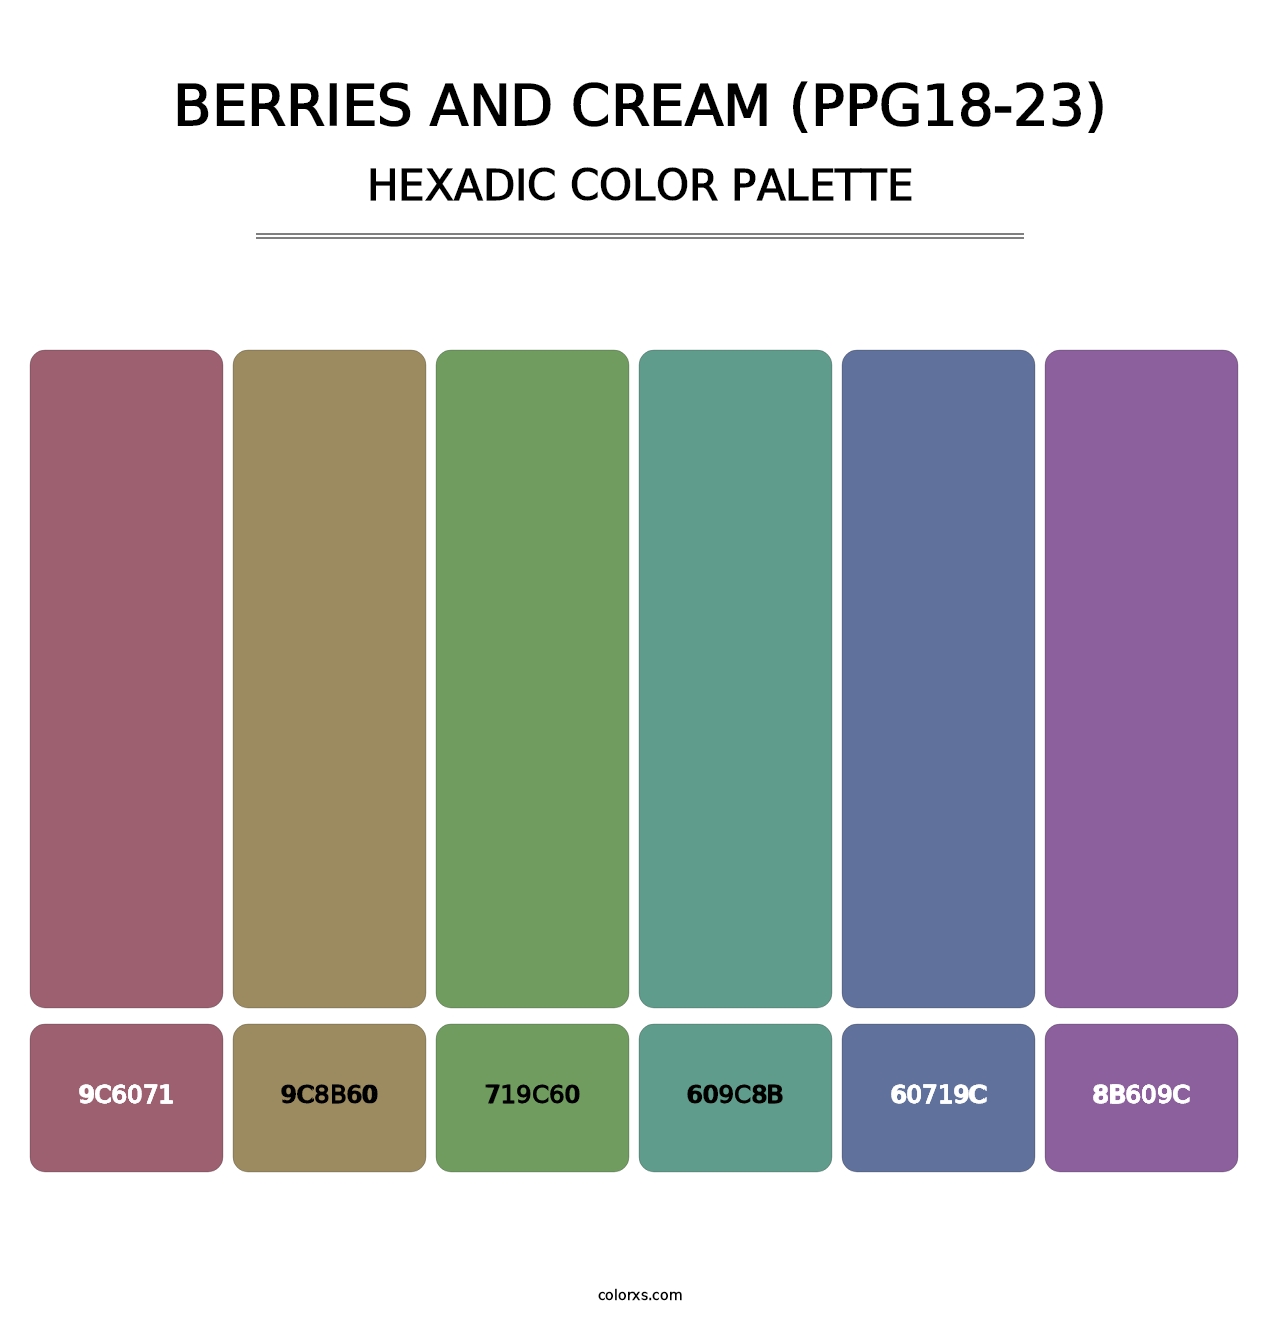 Berries And Cream (PPG18-23) - Hexadic Color Palette